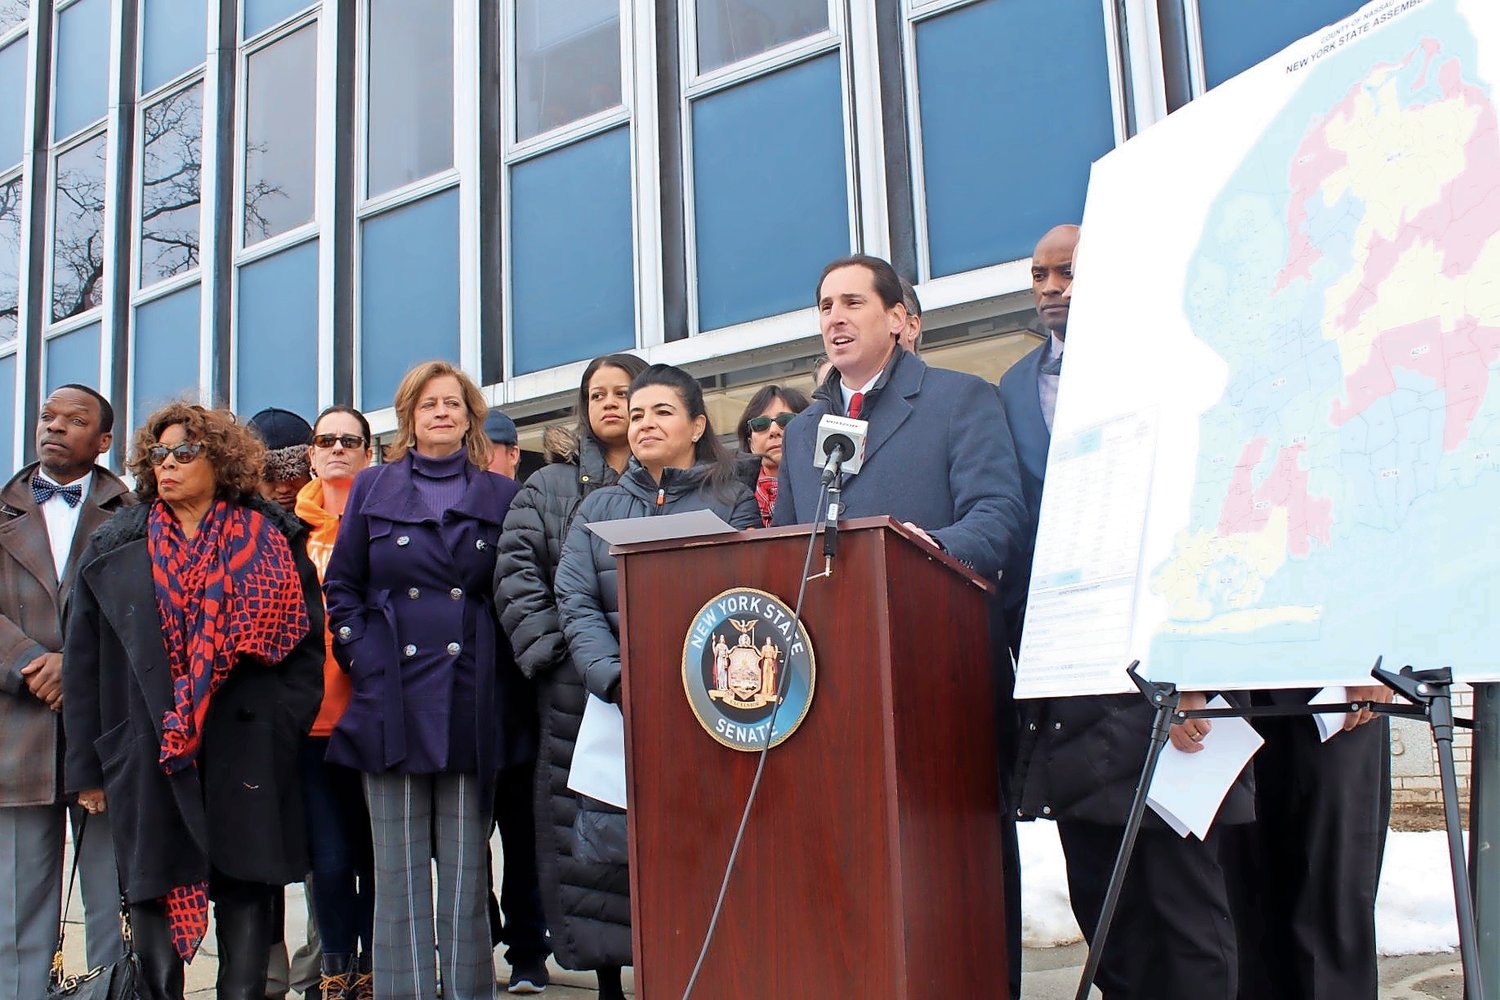 State Sen. Todd Kaminsky joined local and state officials at a news conference in Mineola Sunday, where they called on Republicans at the Nassau County Board of Elections on to establish more early voting locations.